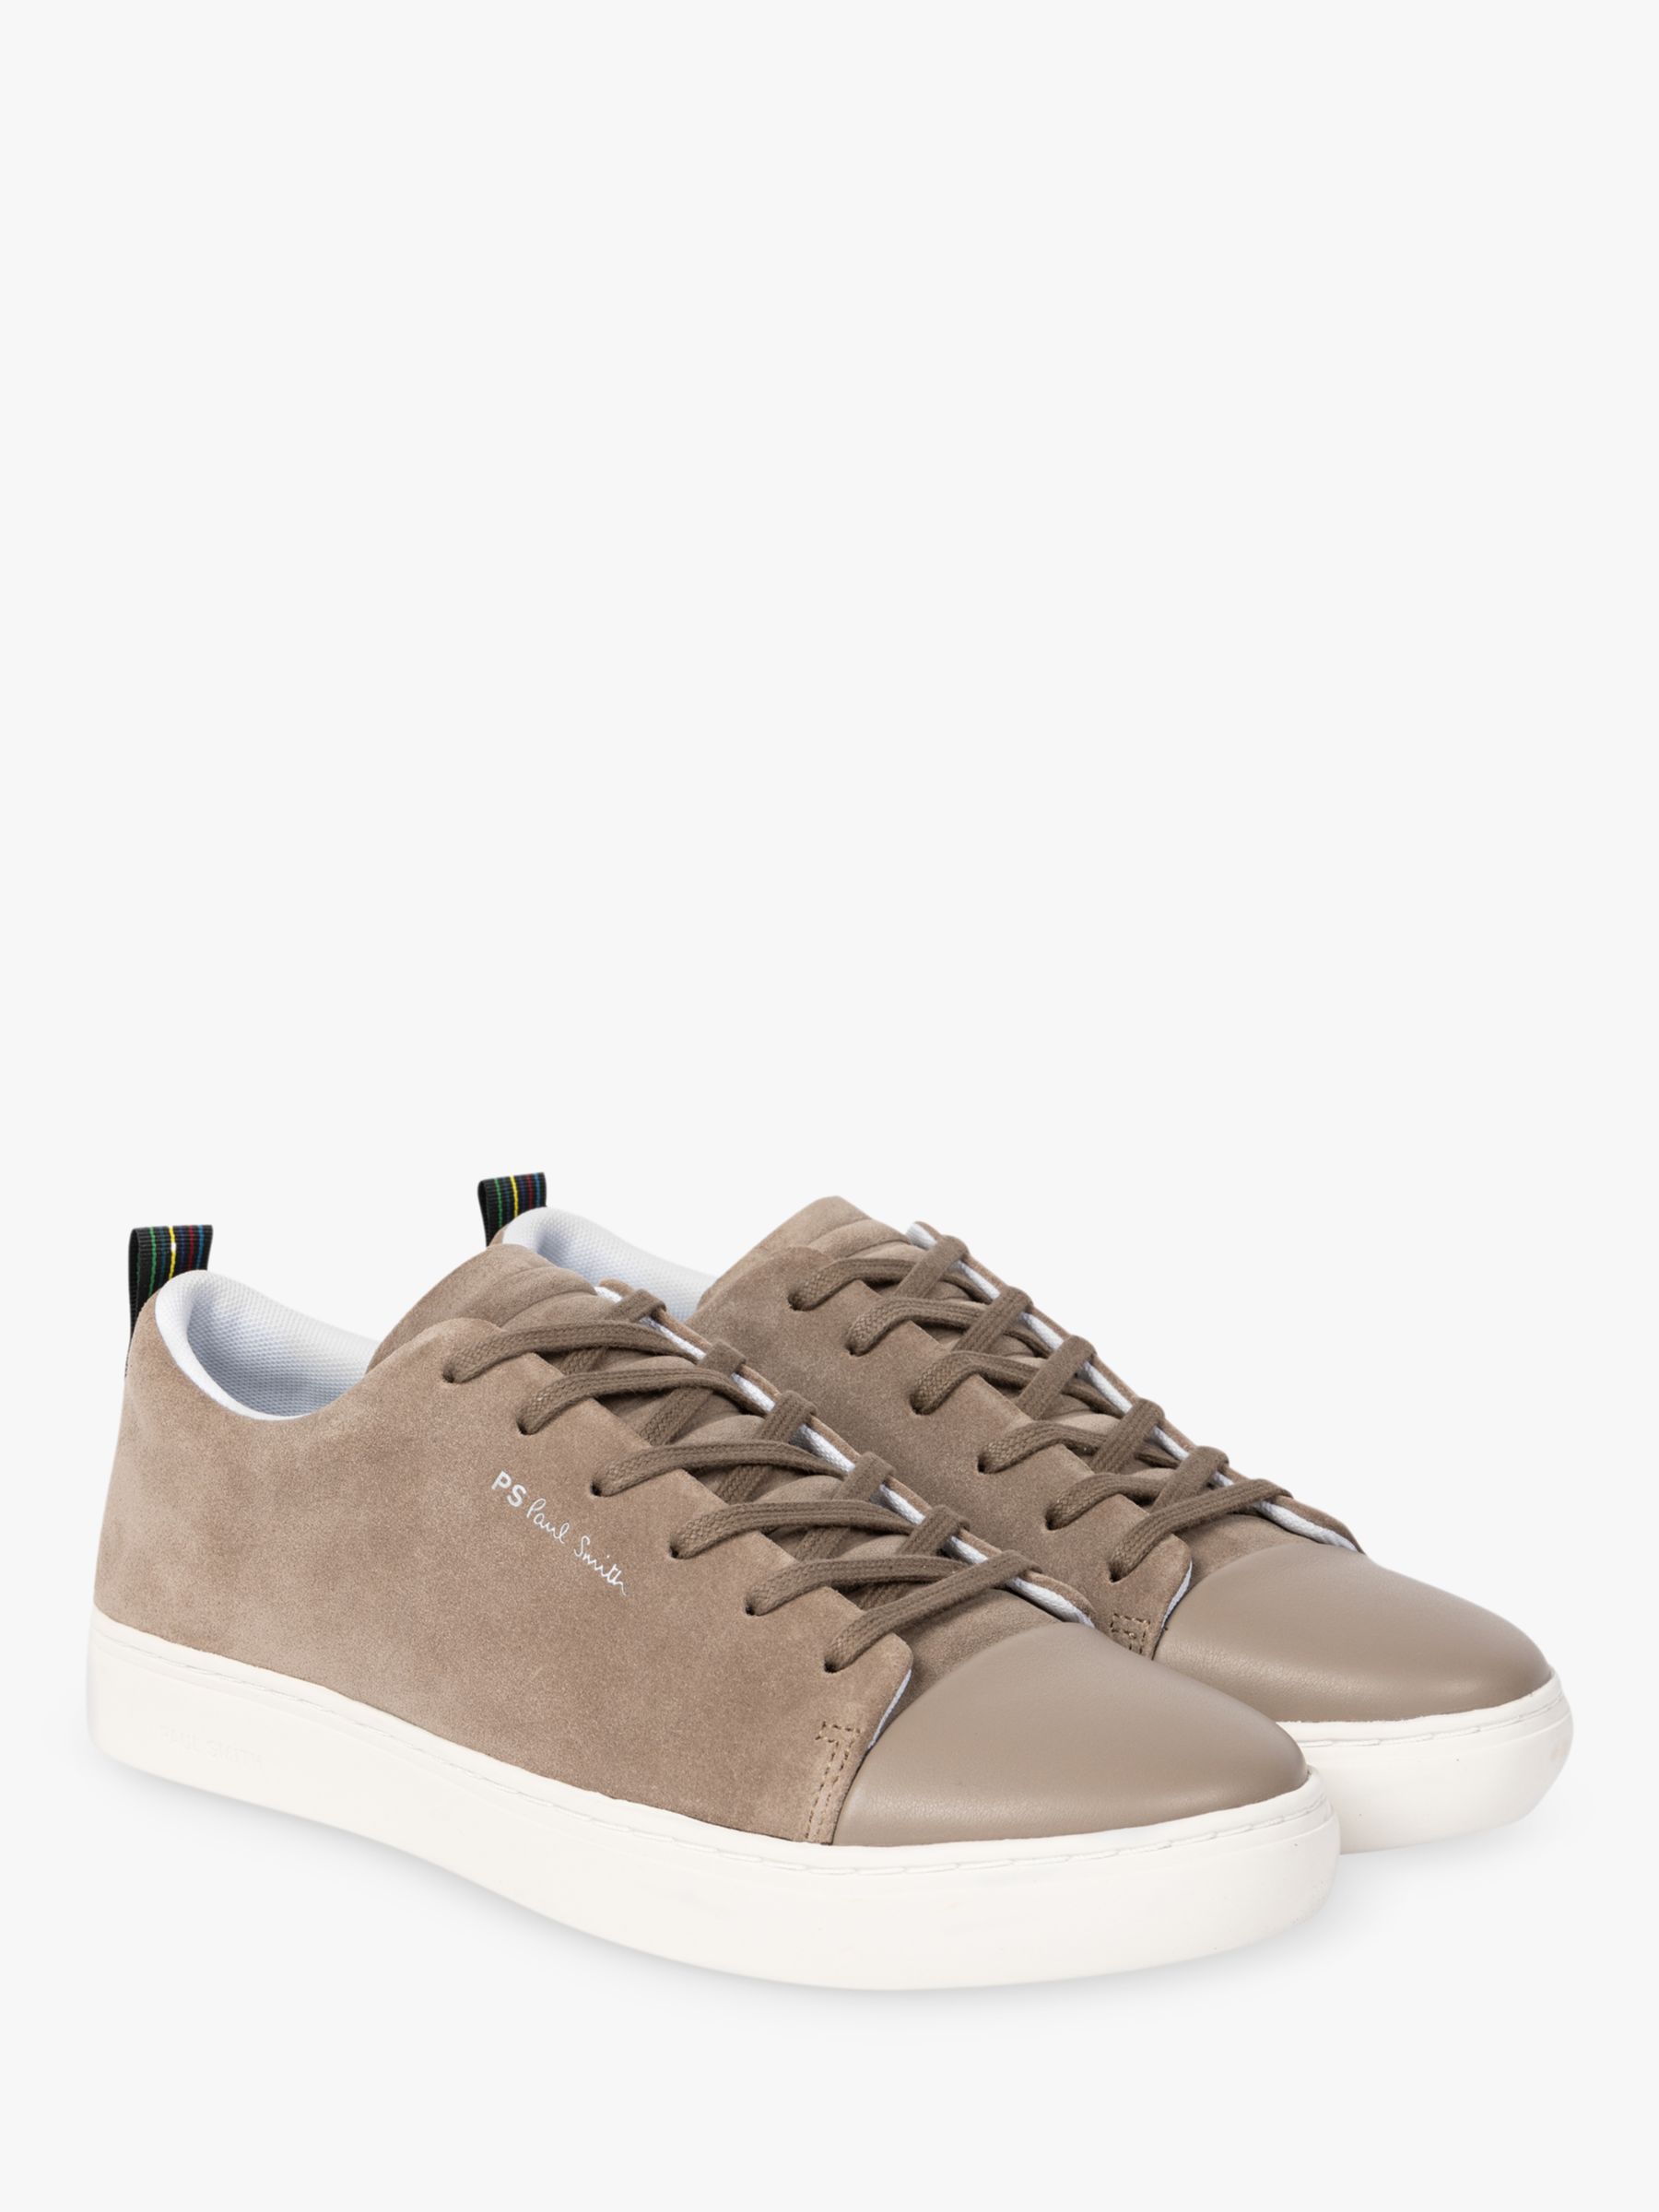 Paul Smith Lee Suede Trainers, Taupe, 7